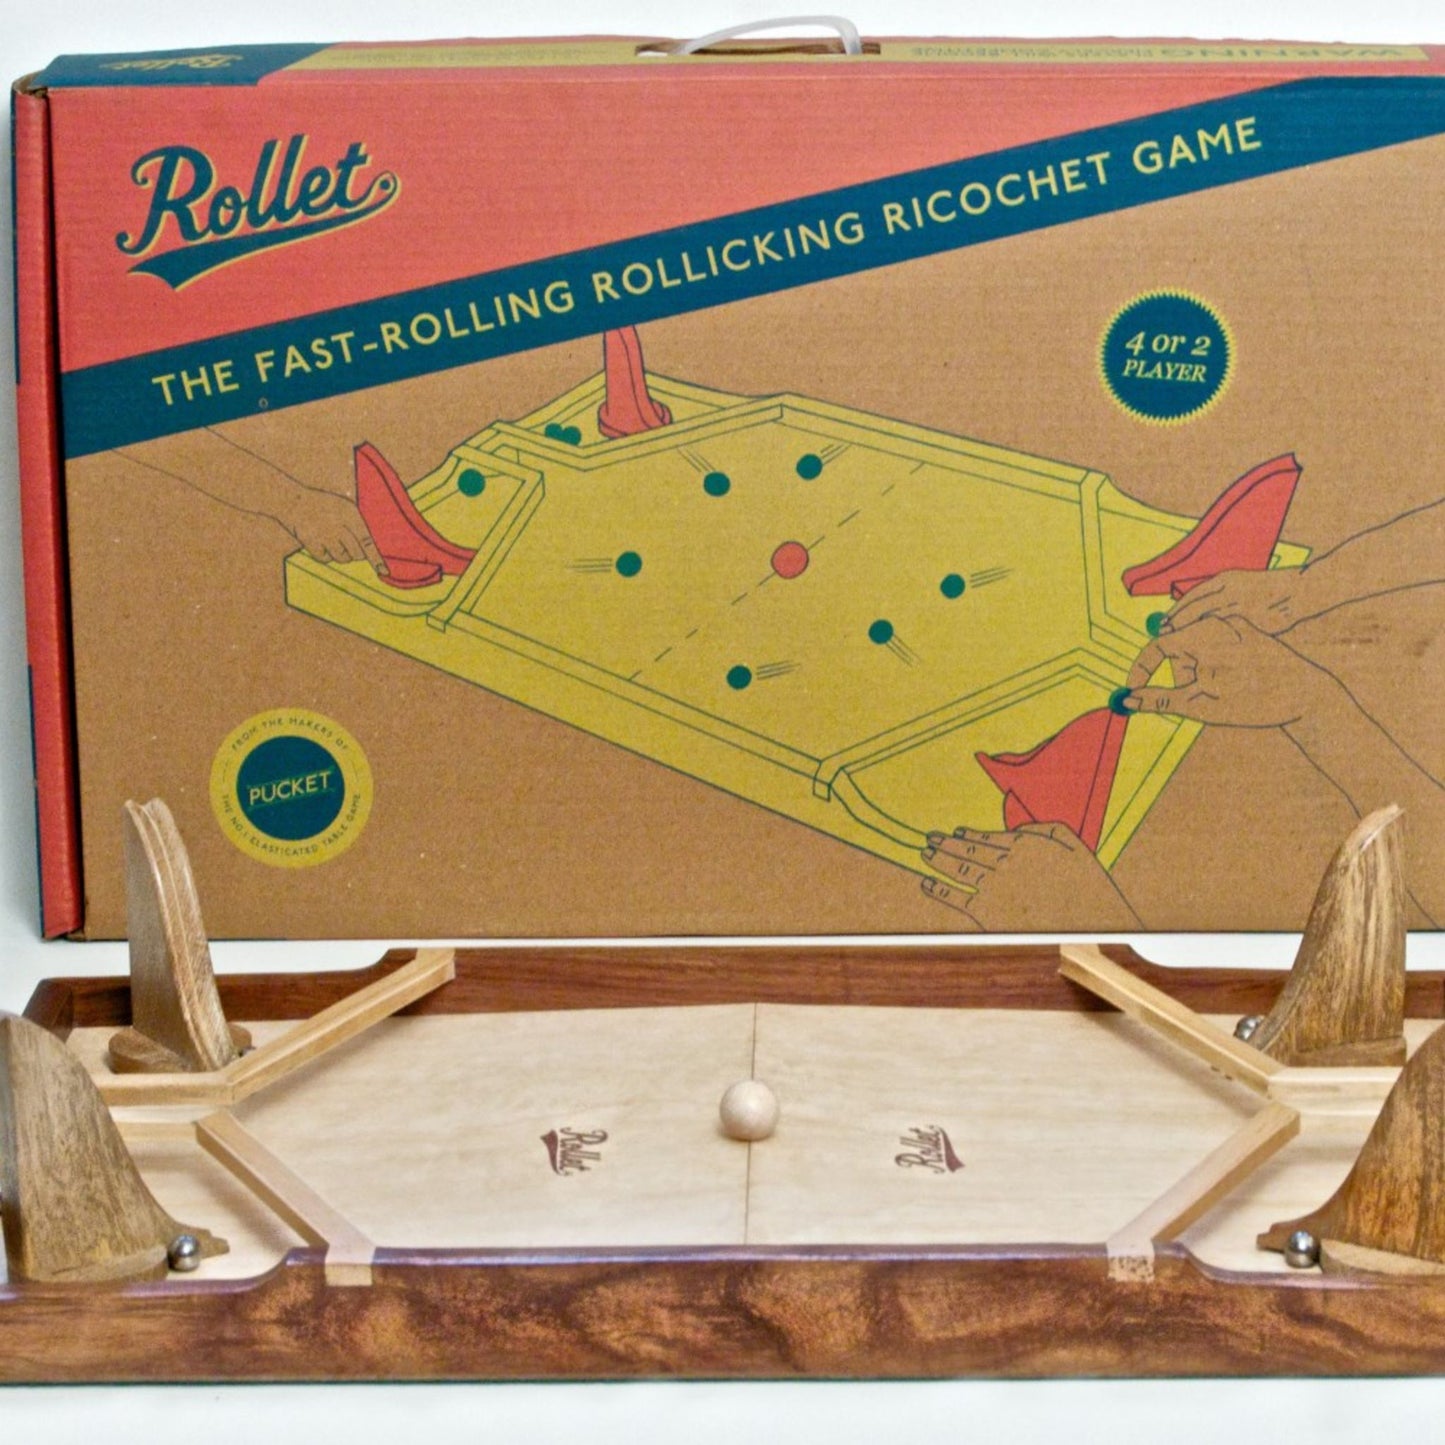 Rollet Ricochet Game - Fair Trade Wooden Games - Rollet game with box